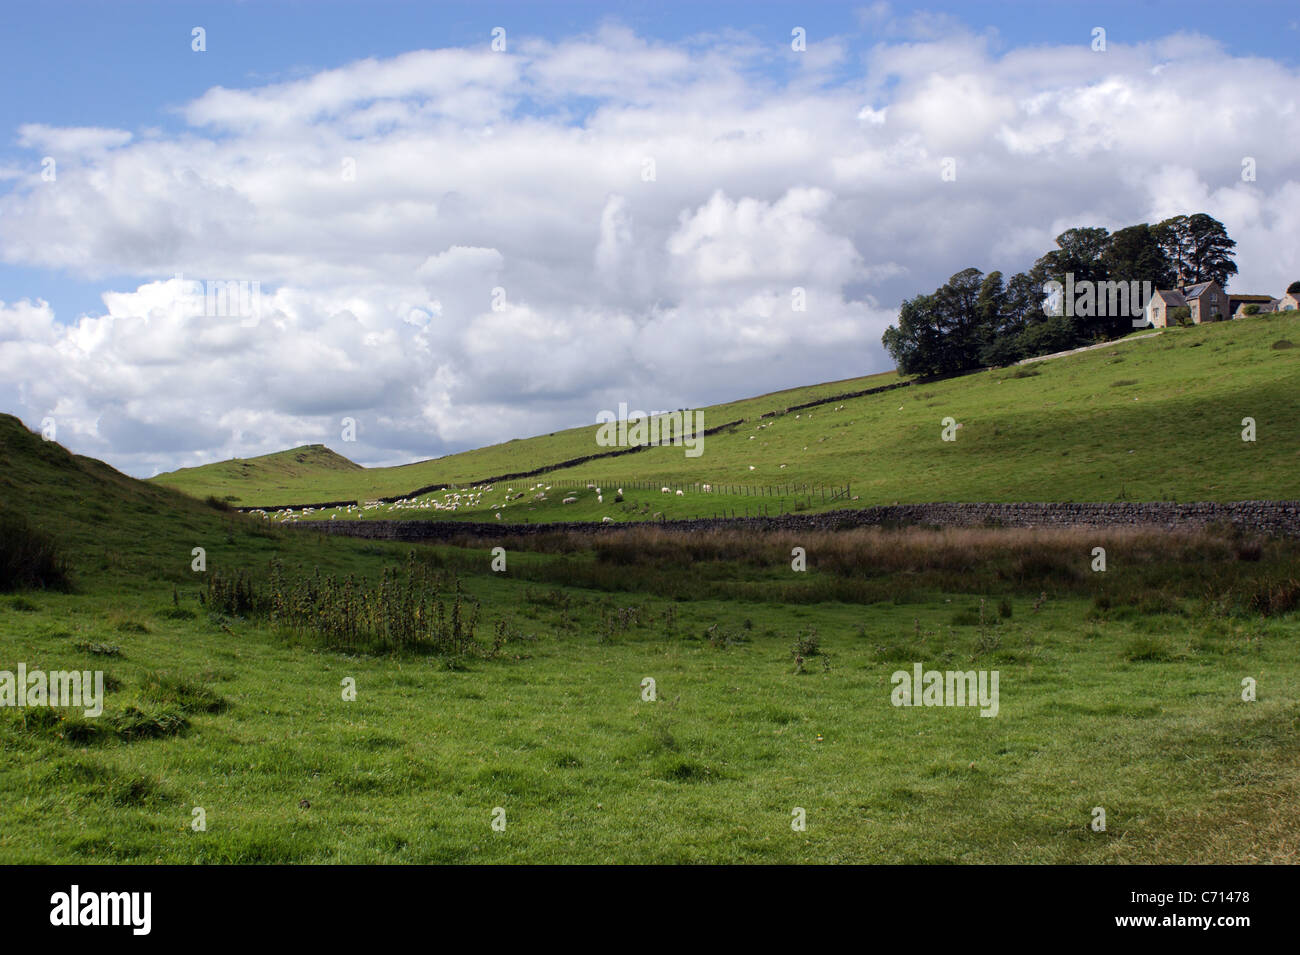 LANDSCAPE SHEEP GRAZING IN THE ENGLISH COUNTRYSIDE NEAR HOUSETEADS NORTHUMBERLAND SUMMER Stock Photo